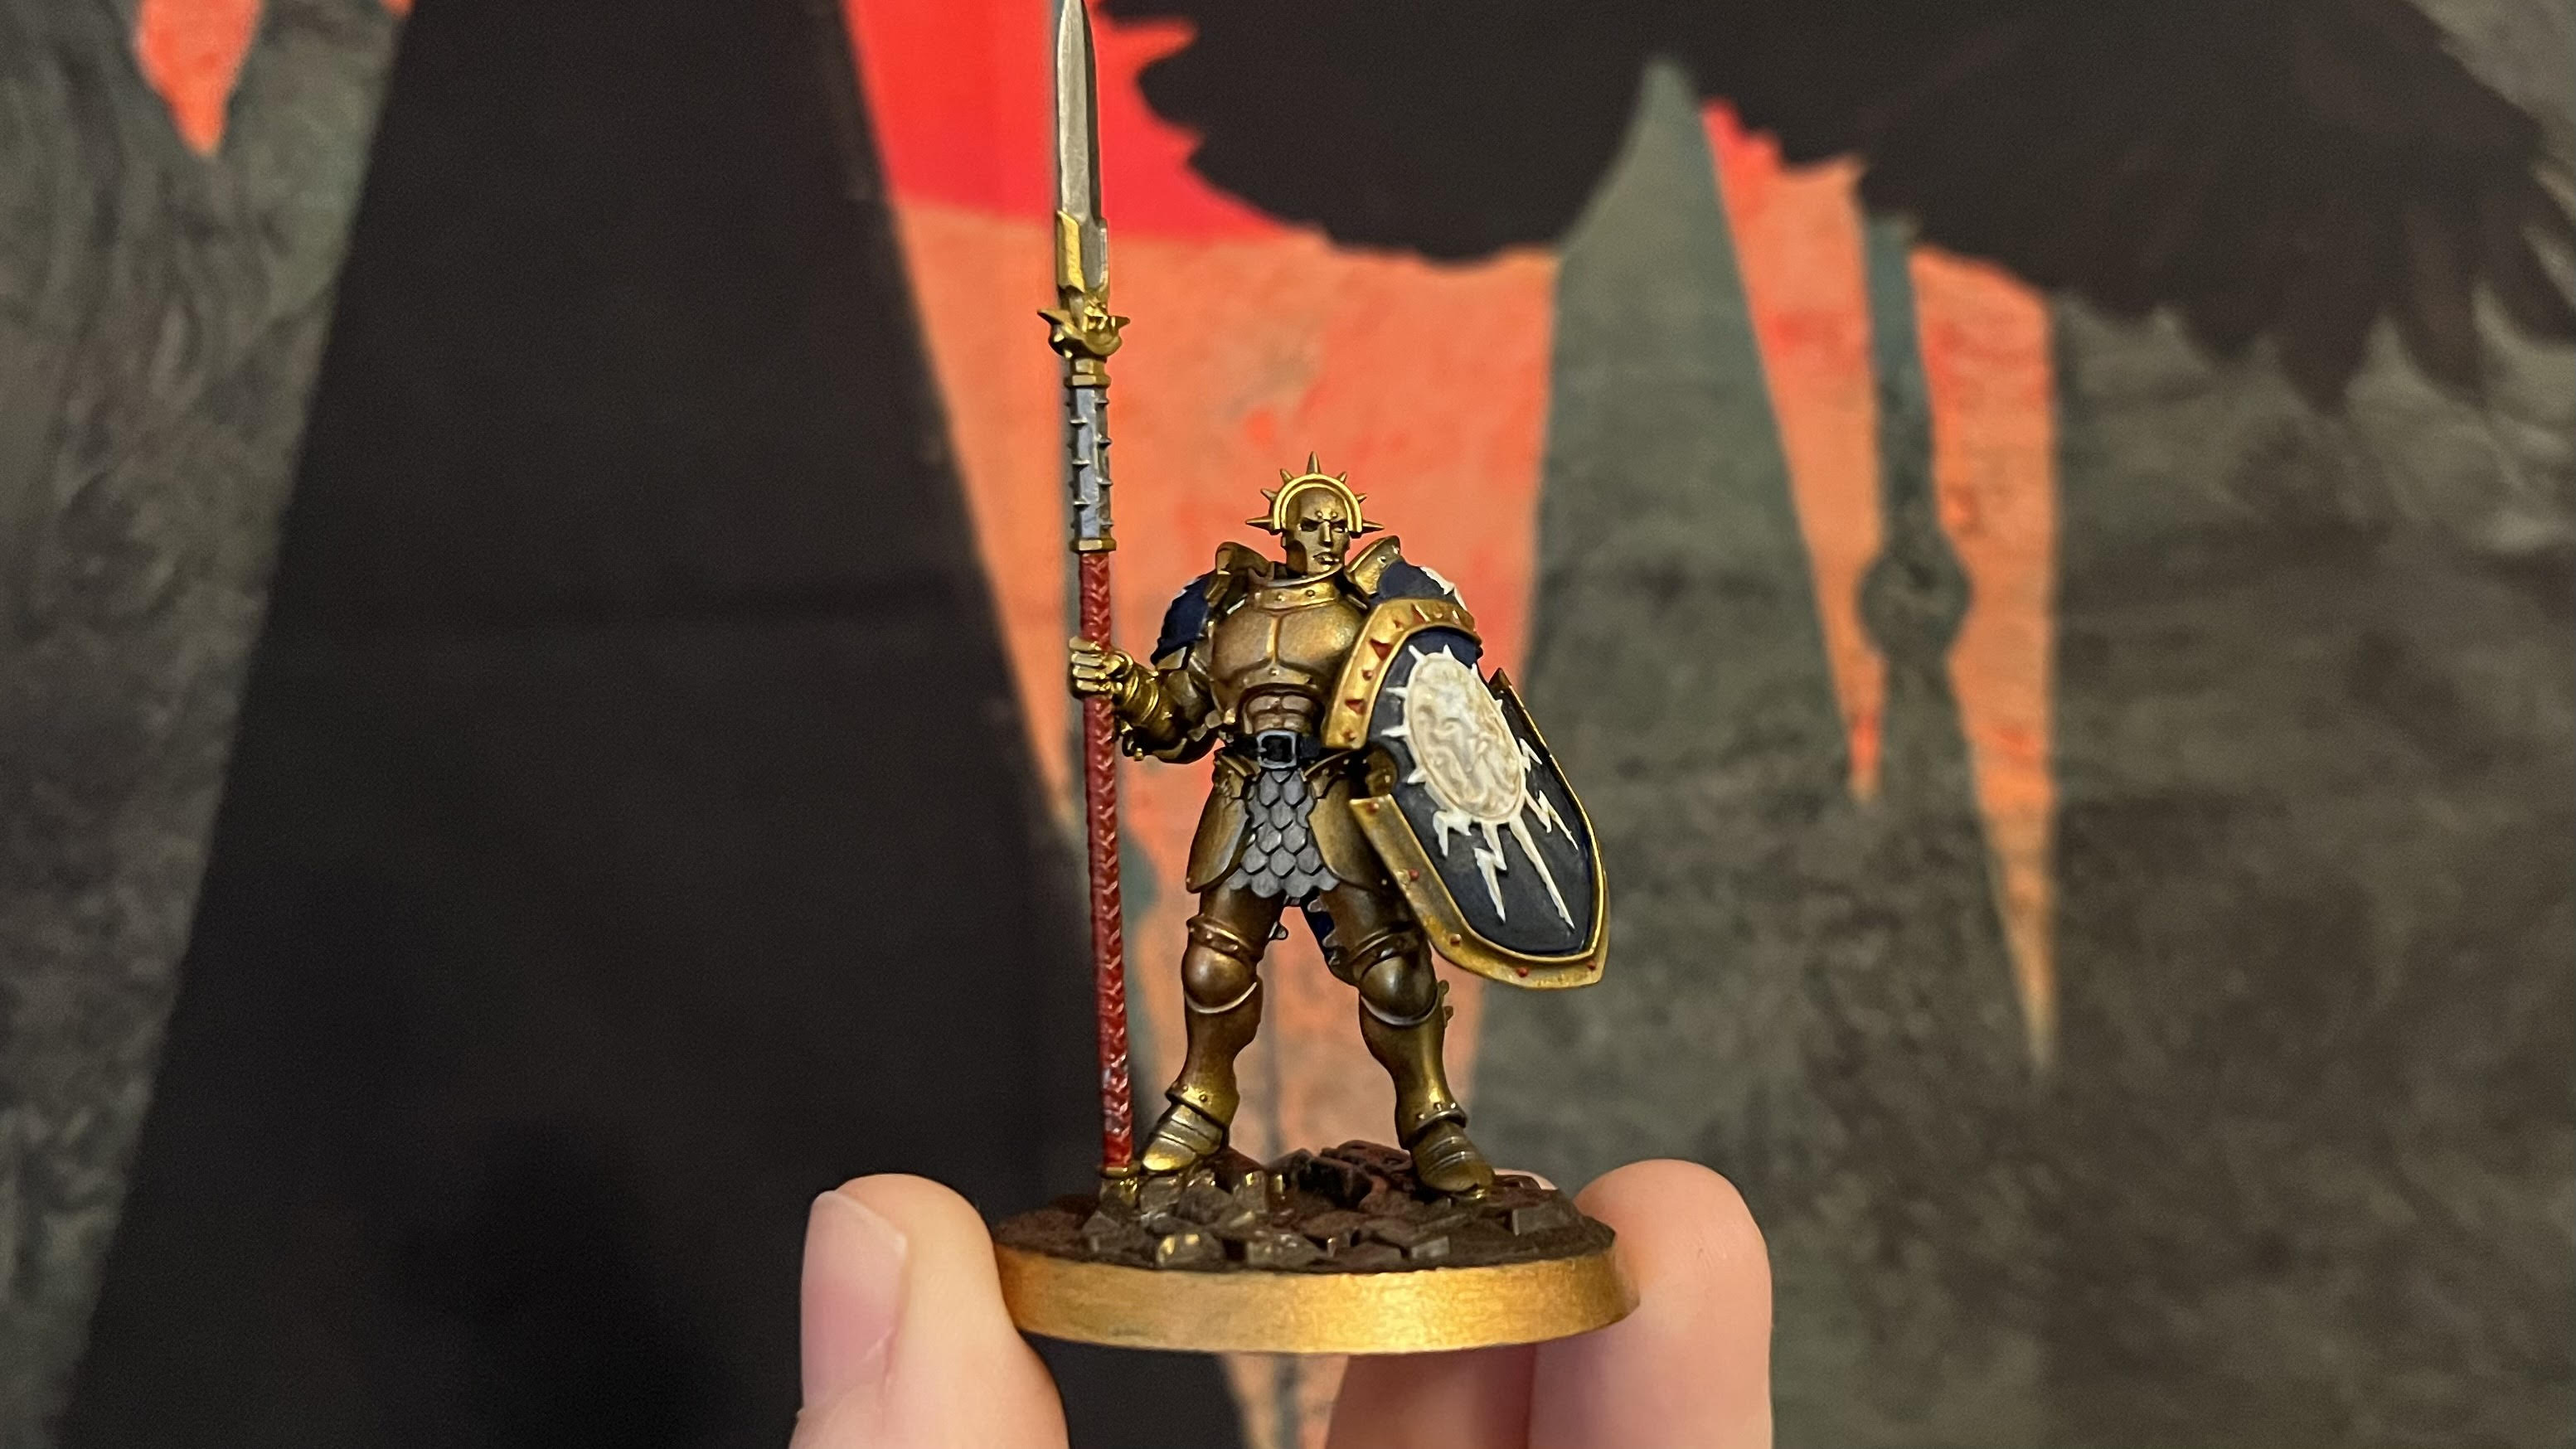 Painted Stormcast Eternal Vindictor mini. It has gold armor and a blue and white shield